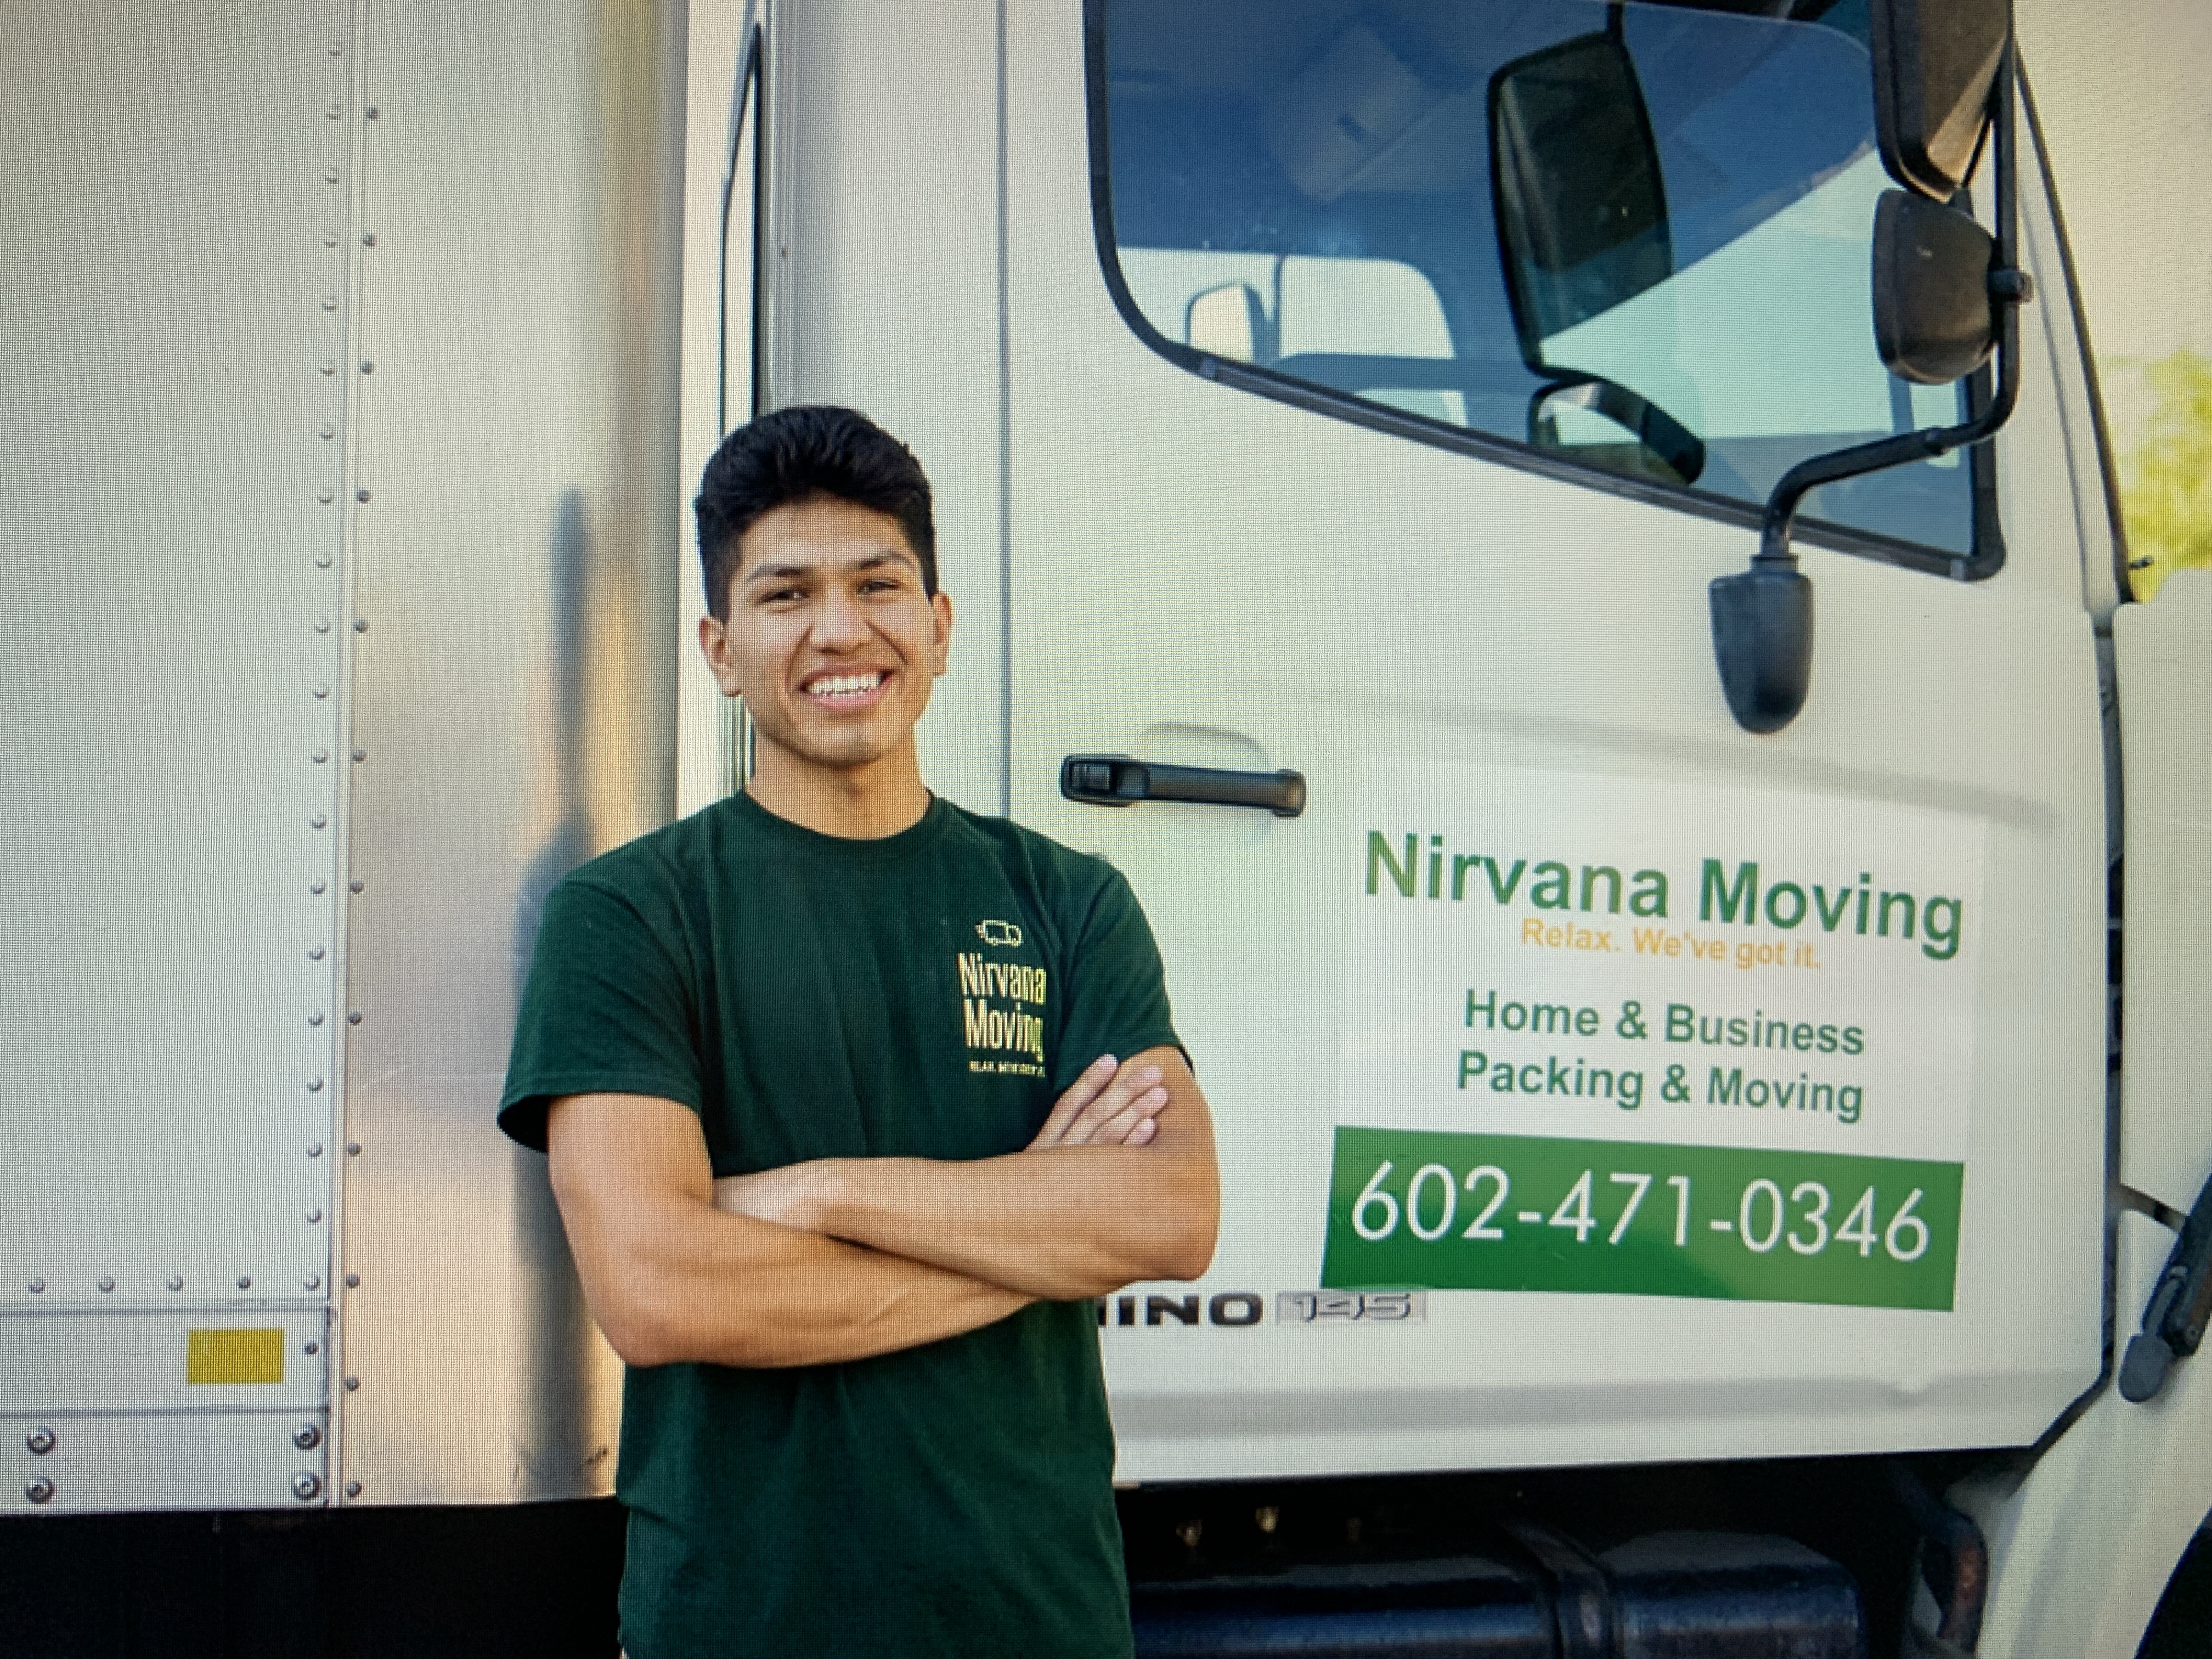 Efficient and Trusted Refrigerator Movers in AZ